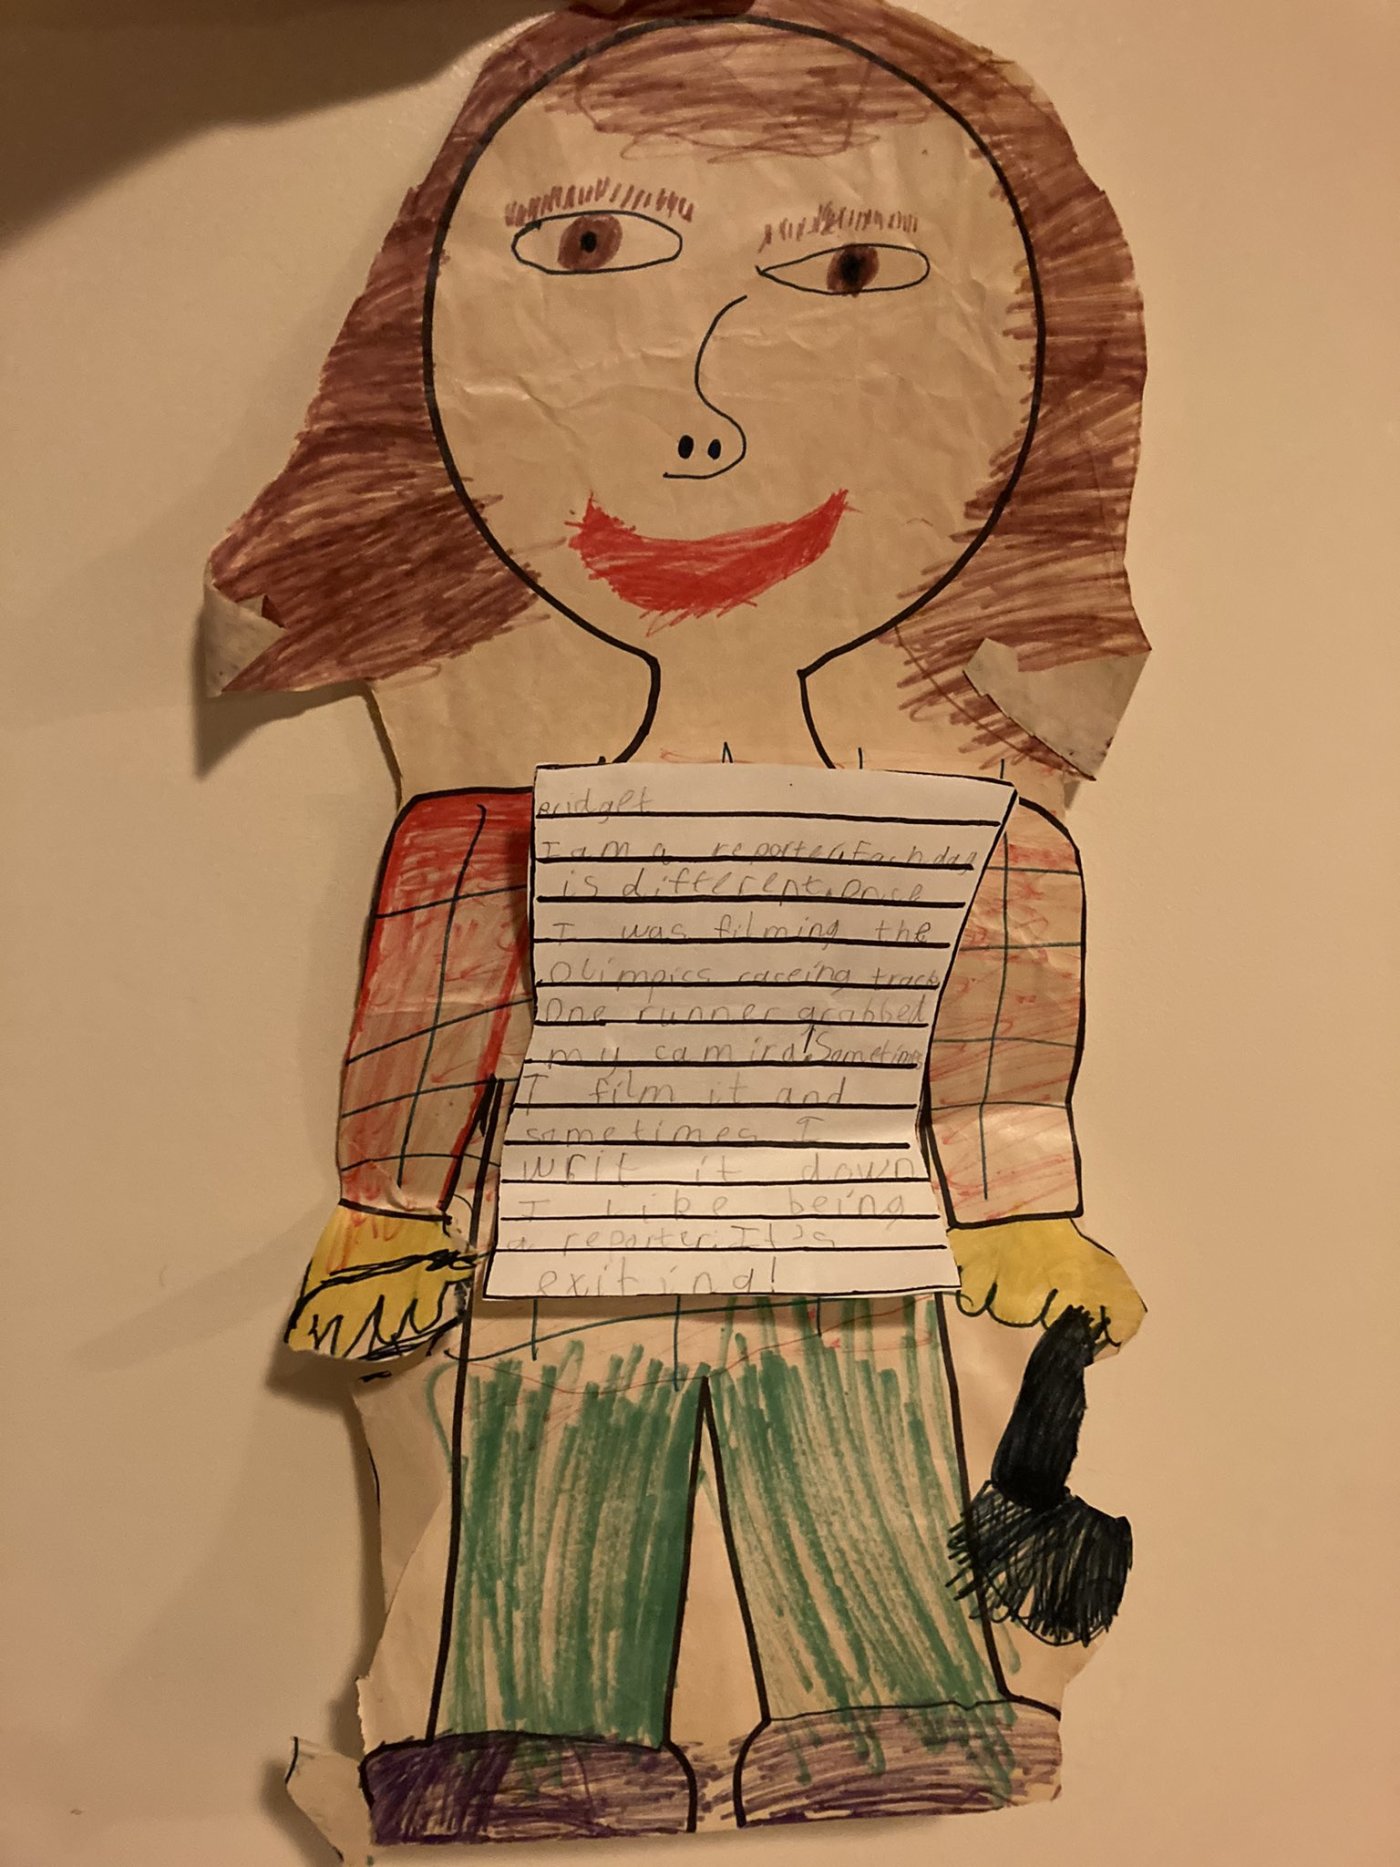 Artwork from Bridget as a child about how she wanted to become a reporter.